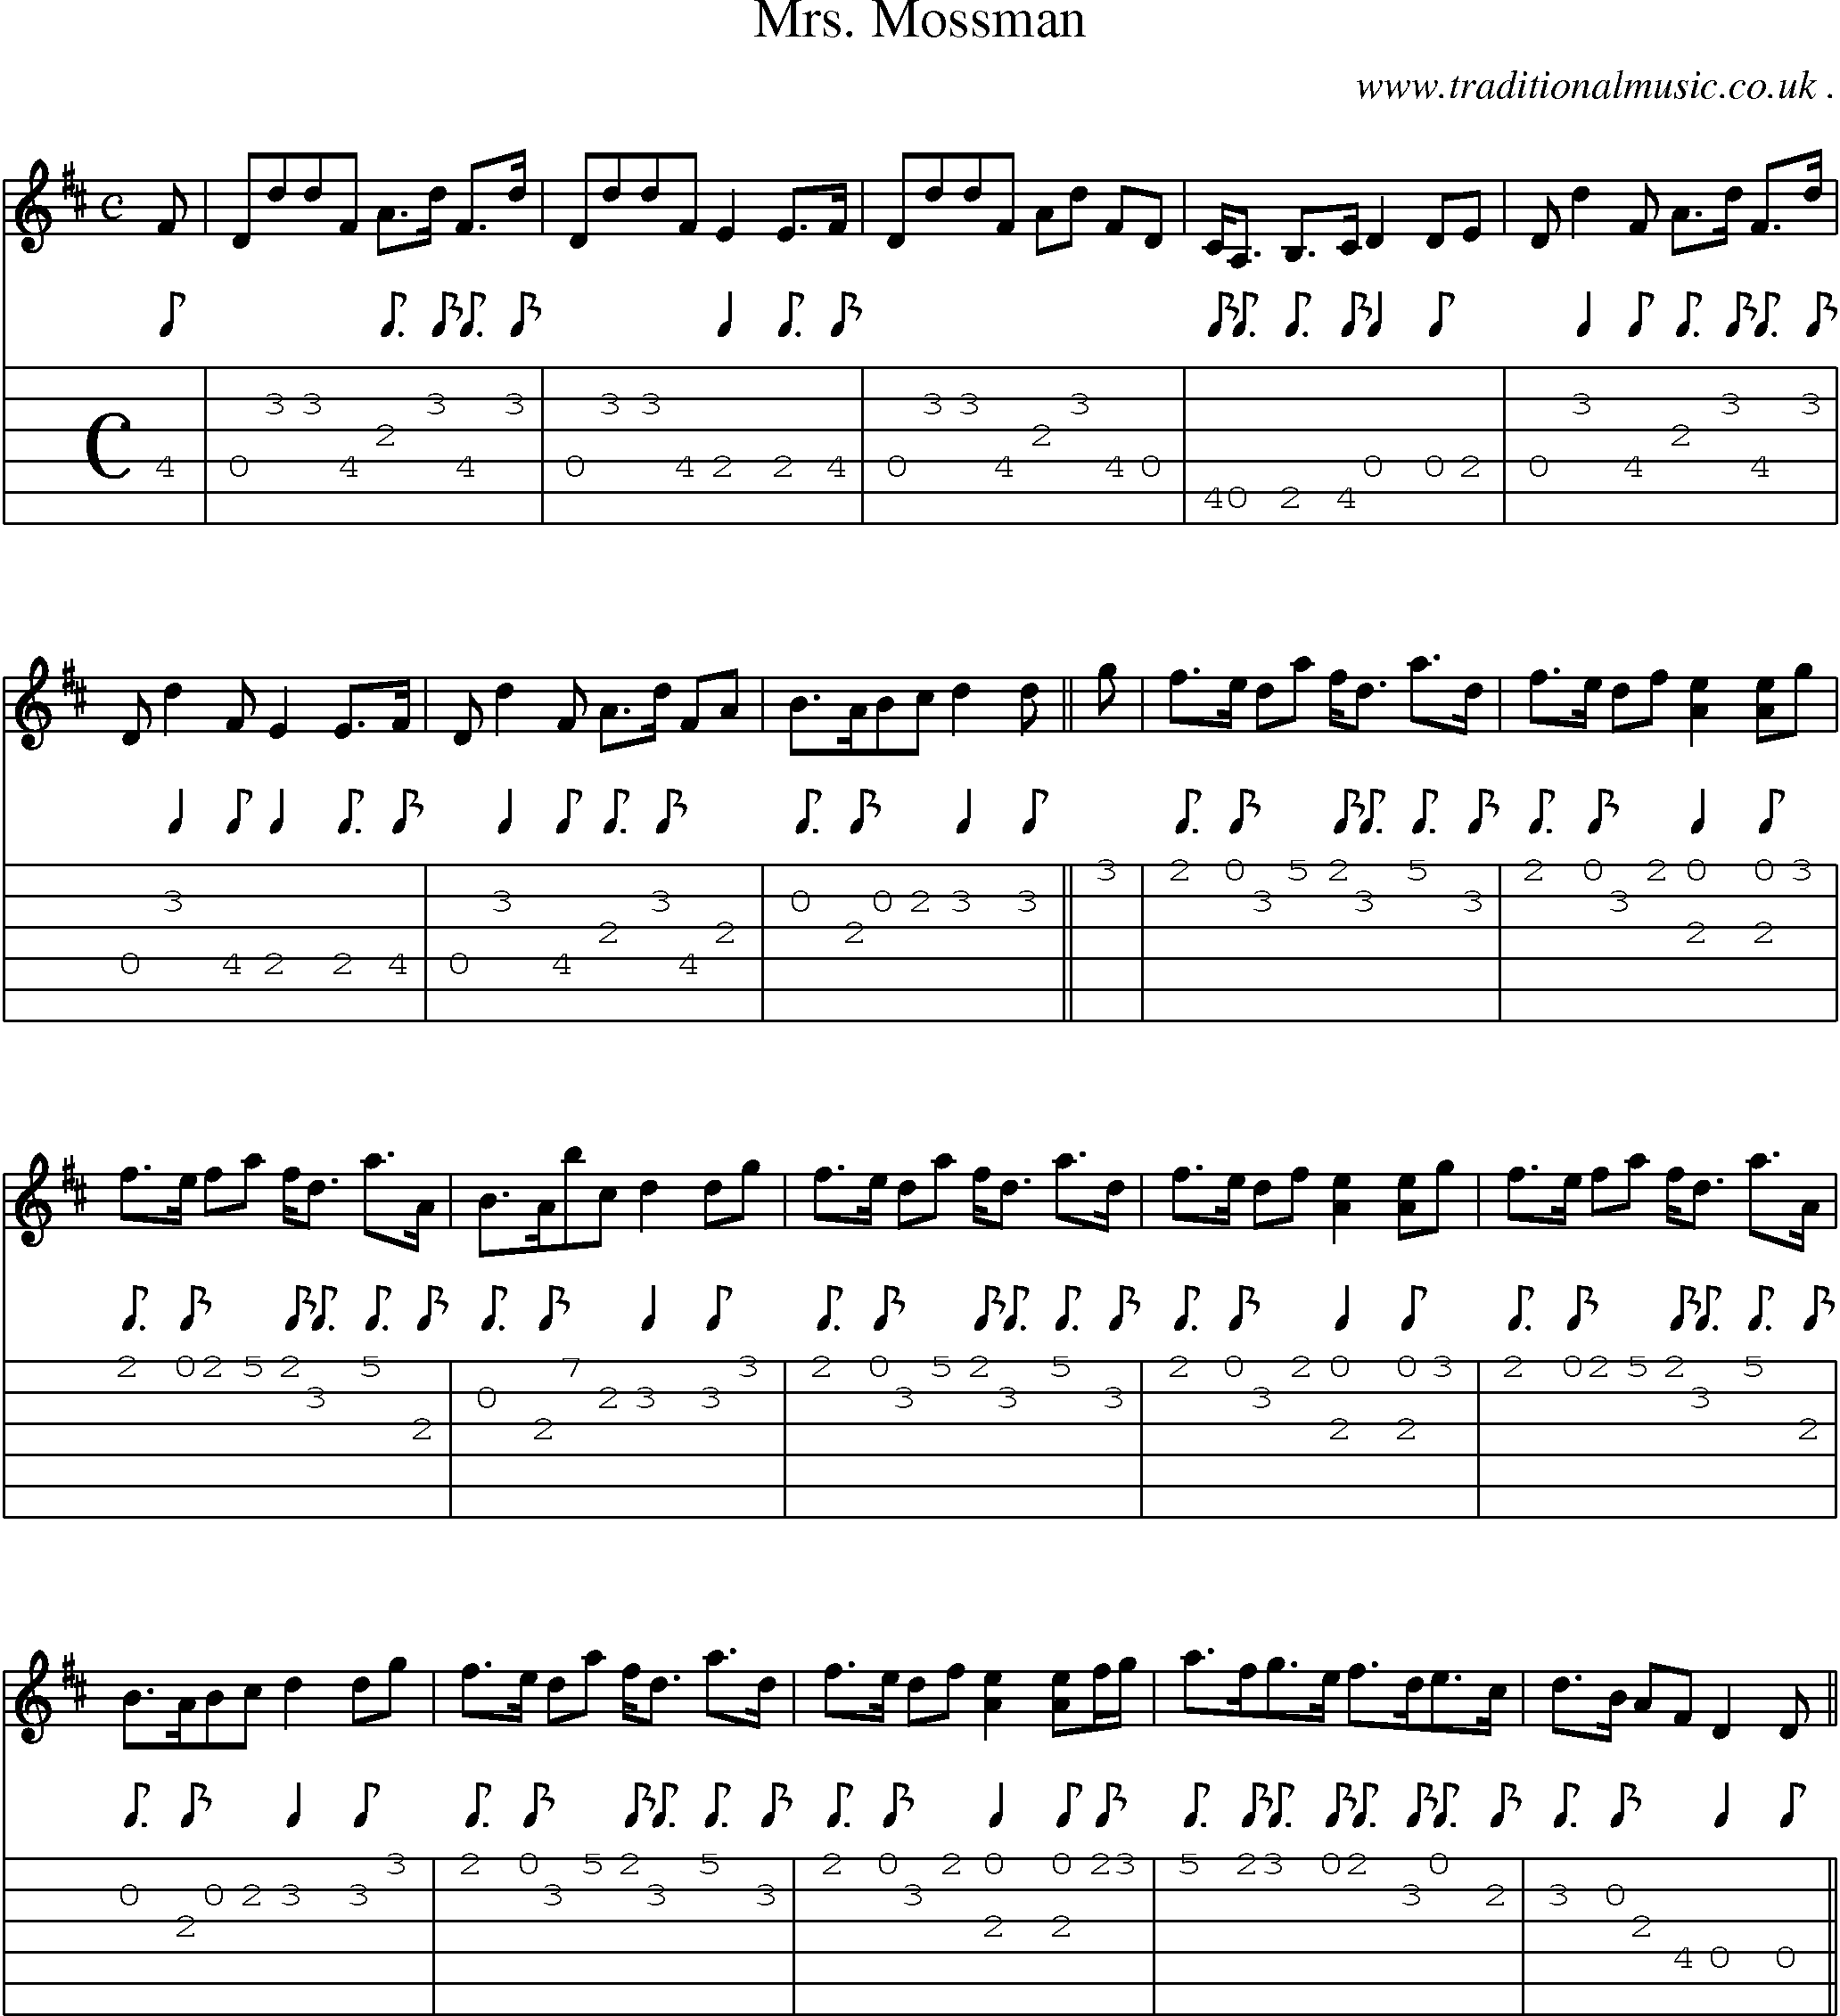 Sheet-music  score, Chords and Guitar Tabs for Mrs Mossman